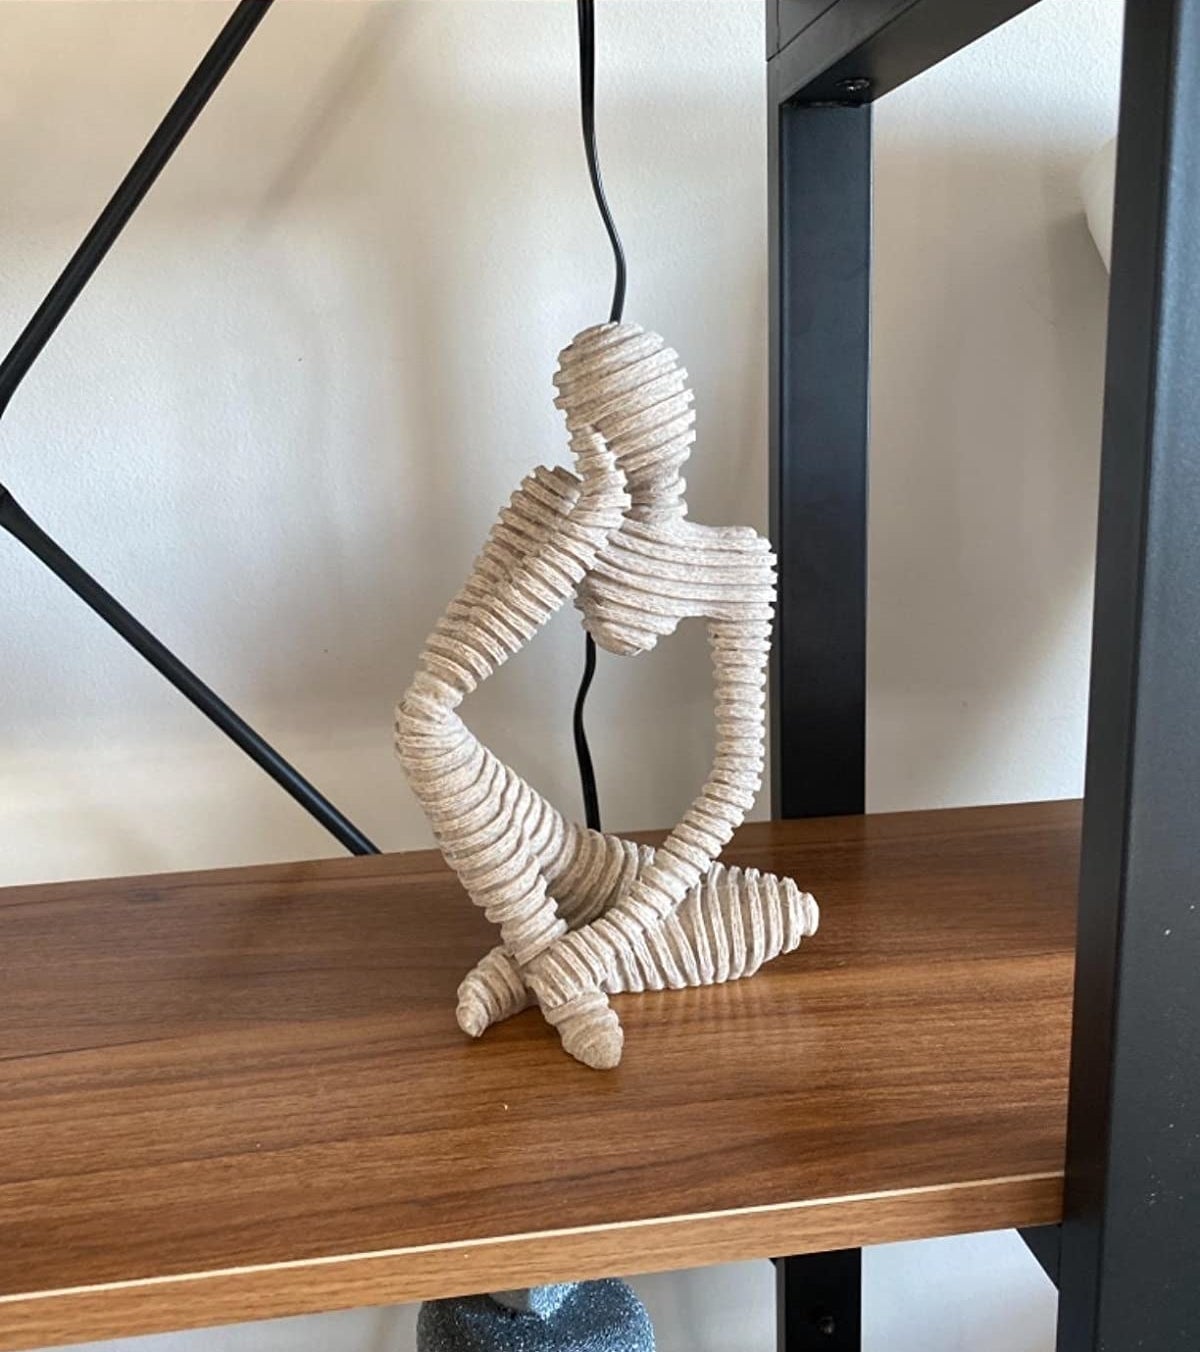 reviewer image of the trycooling thinker statue on a shelf